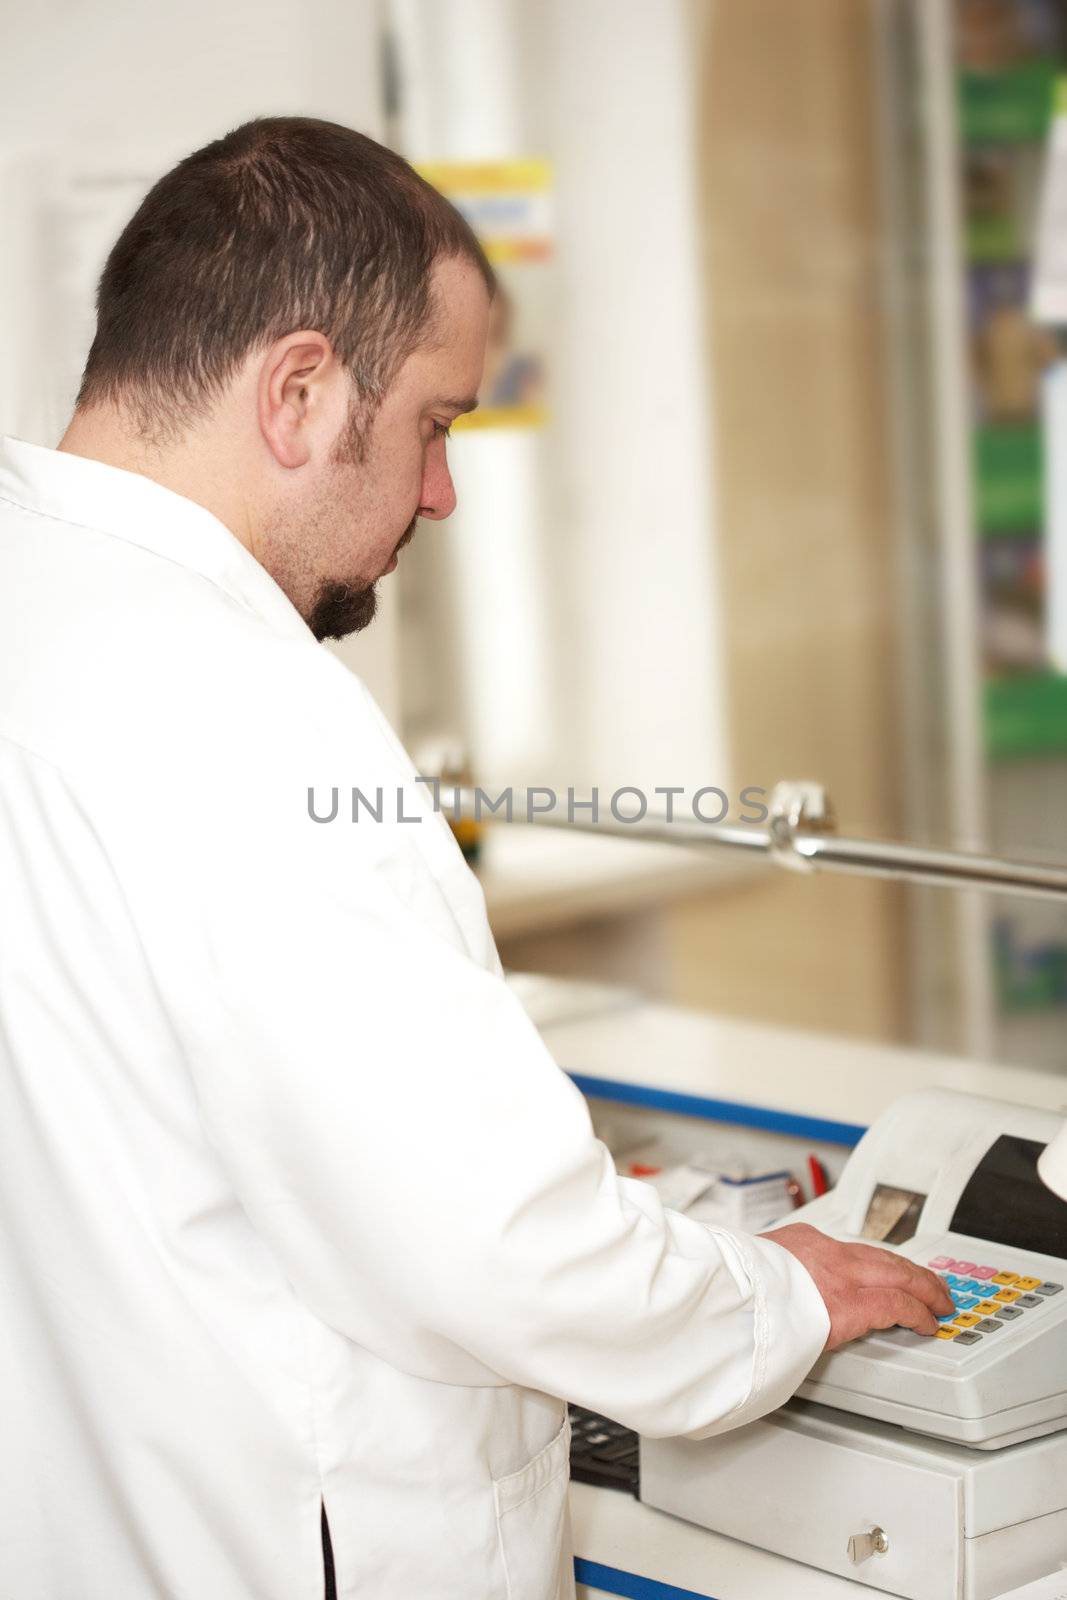 Portrait of a male pharmacist at pharmacy. Selling